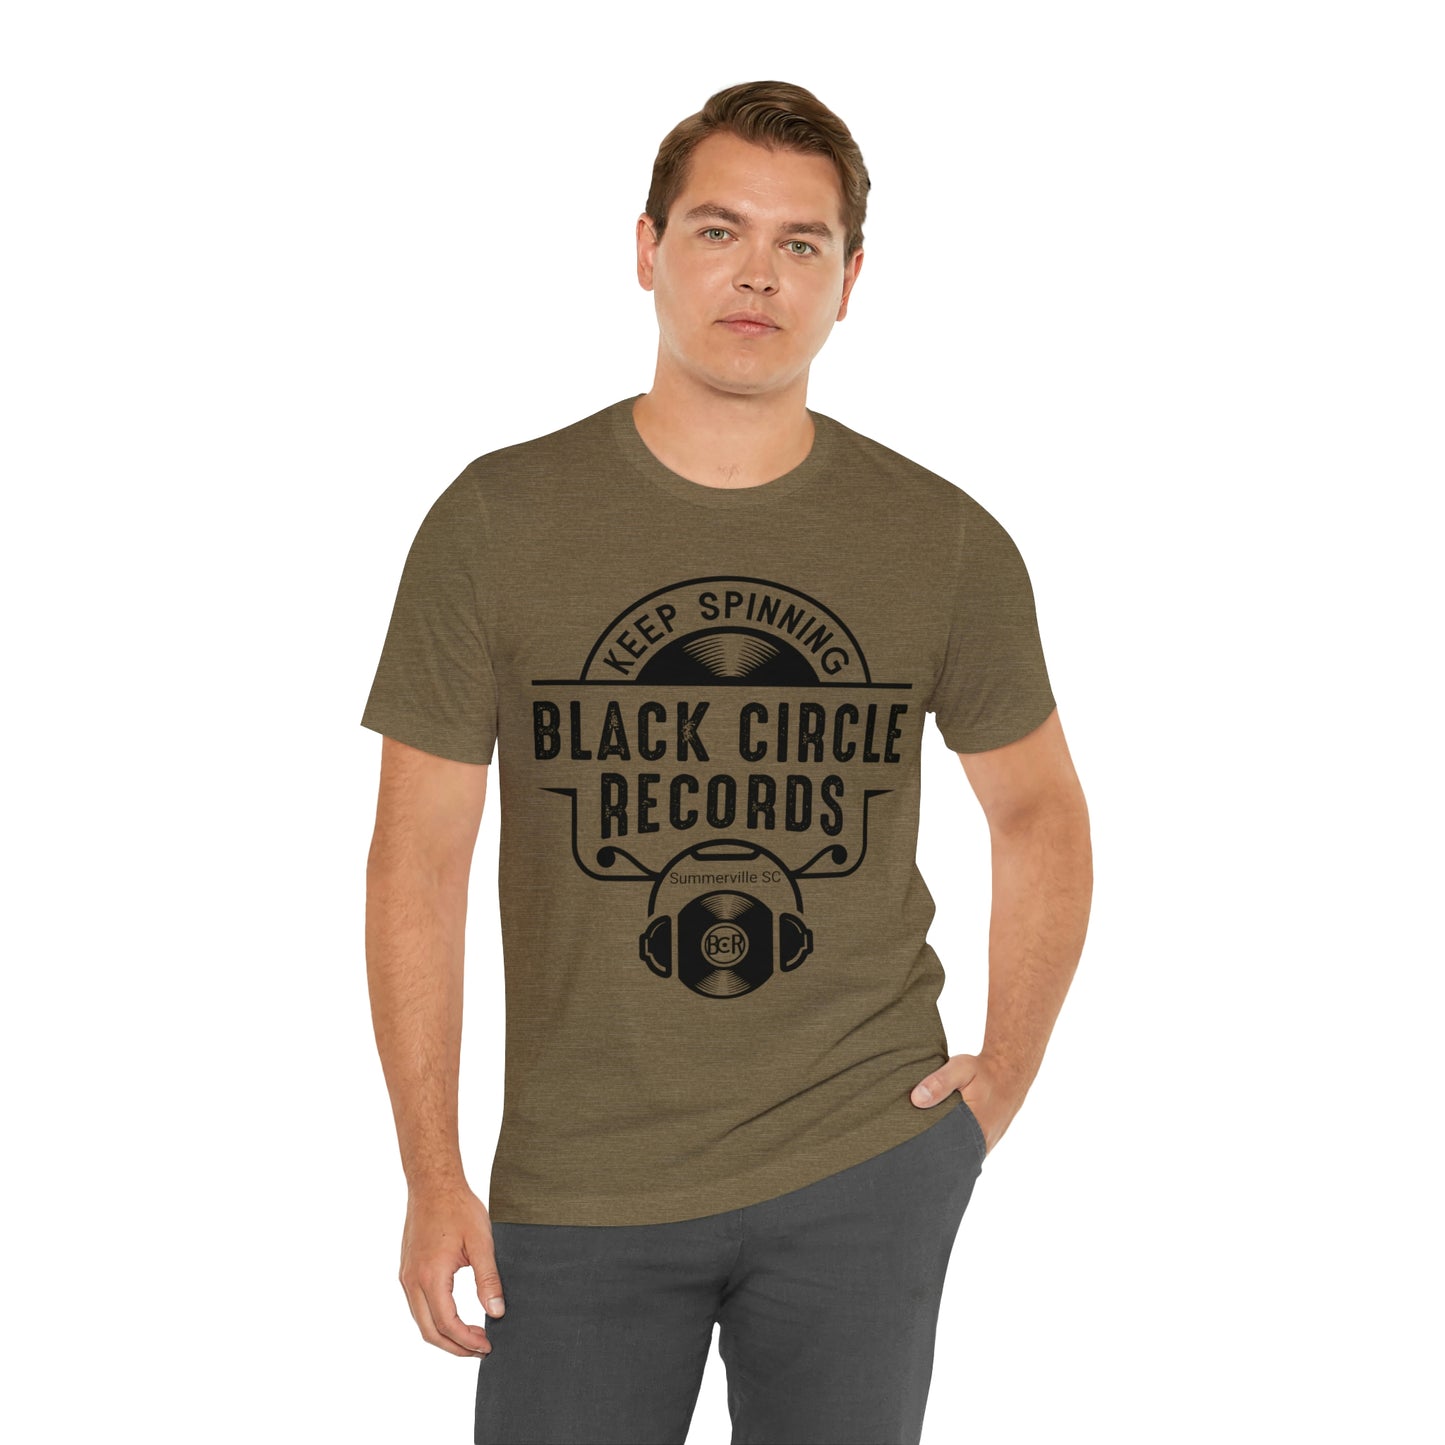 Black Circle Records - Record Store T-Shirt Keep Spinning Vinyl Collection